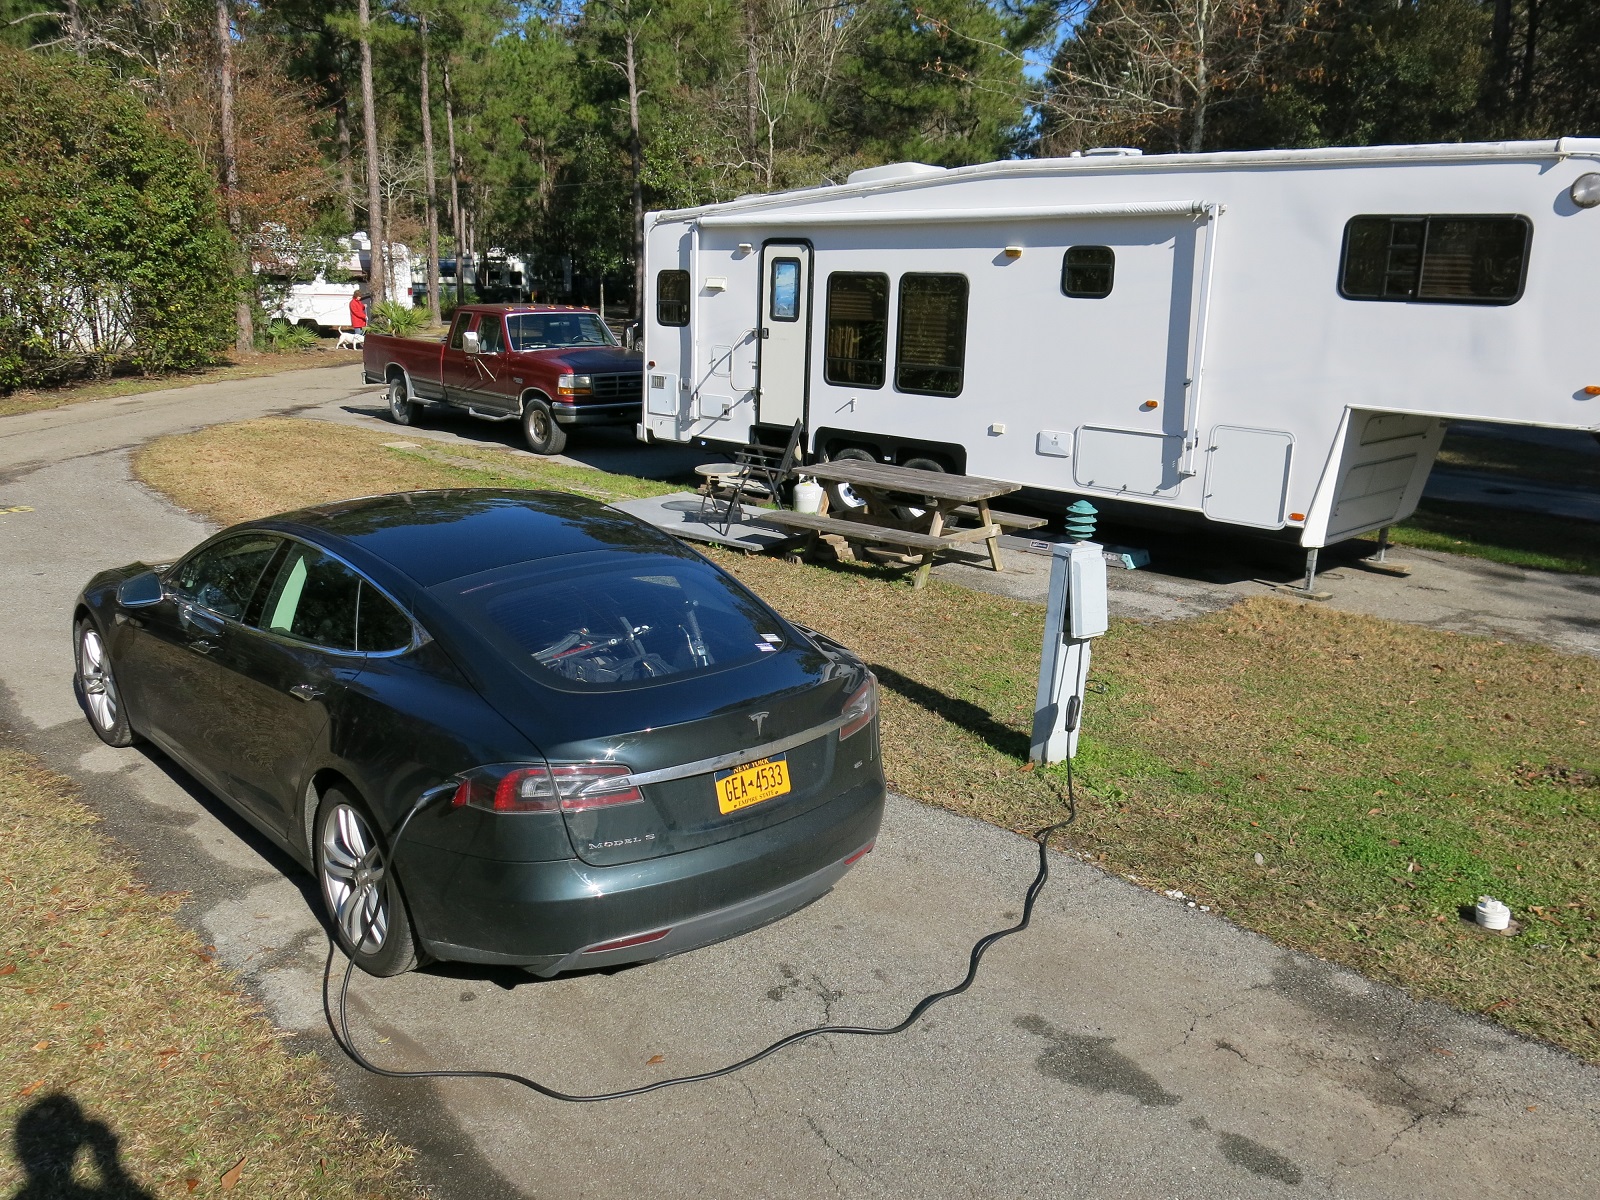 cross country trip with electric car